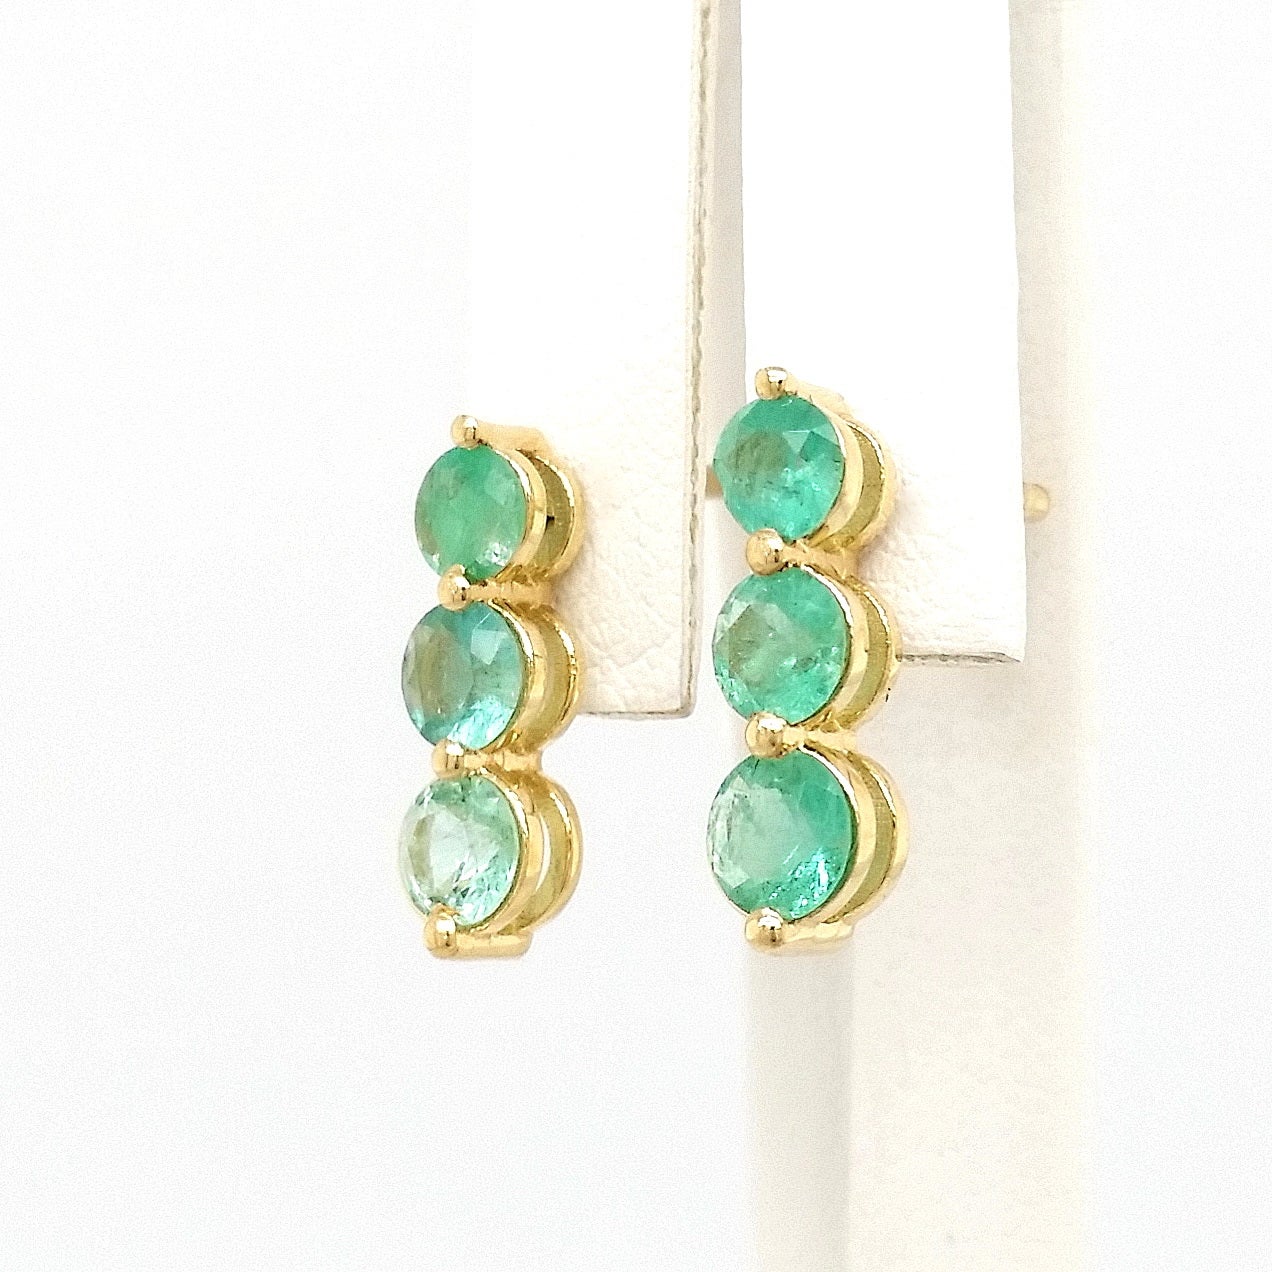 FOR U.S. BUYERS NO VAT 

This elegant earrings feature three Emerald round brilliant sets in 14kt Yellow gold. Each earring is consisting of three emeralds, so this beautiful pair of earrings has a total of six emeralds weighing 1.05 carats in